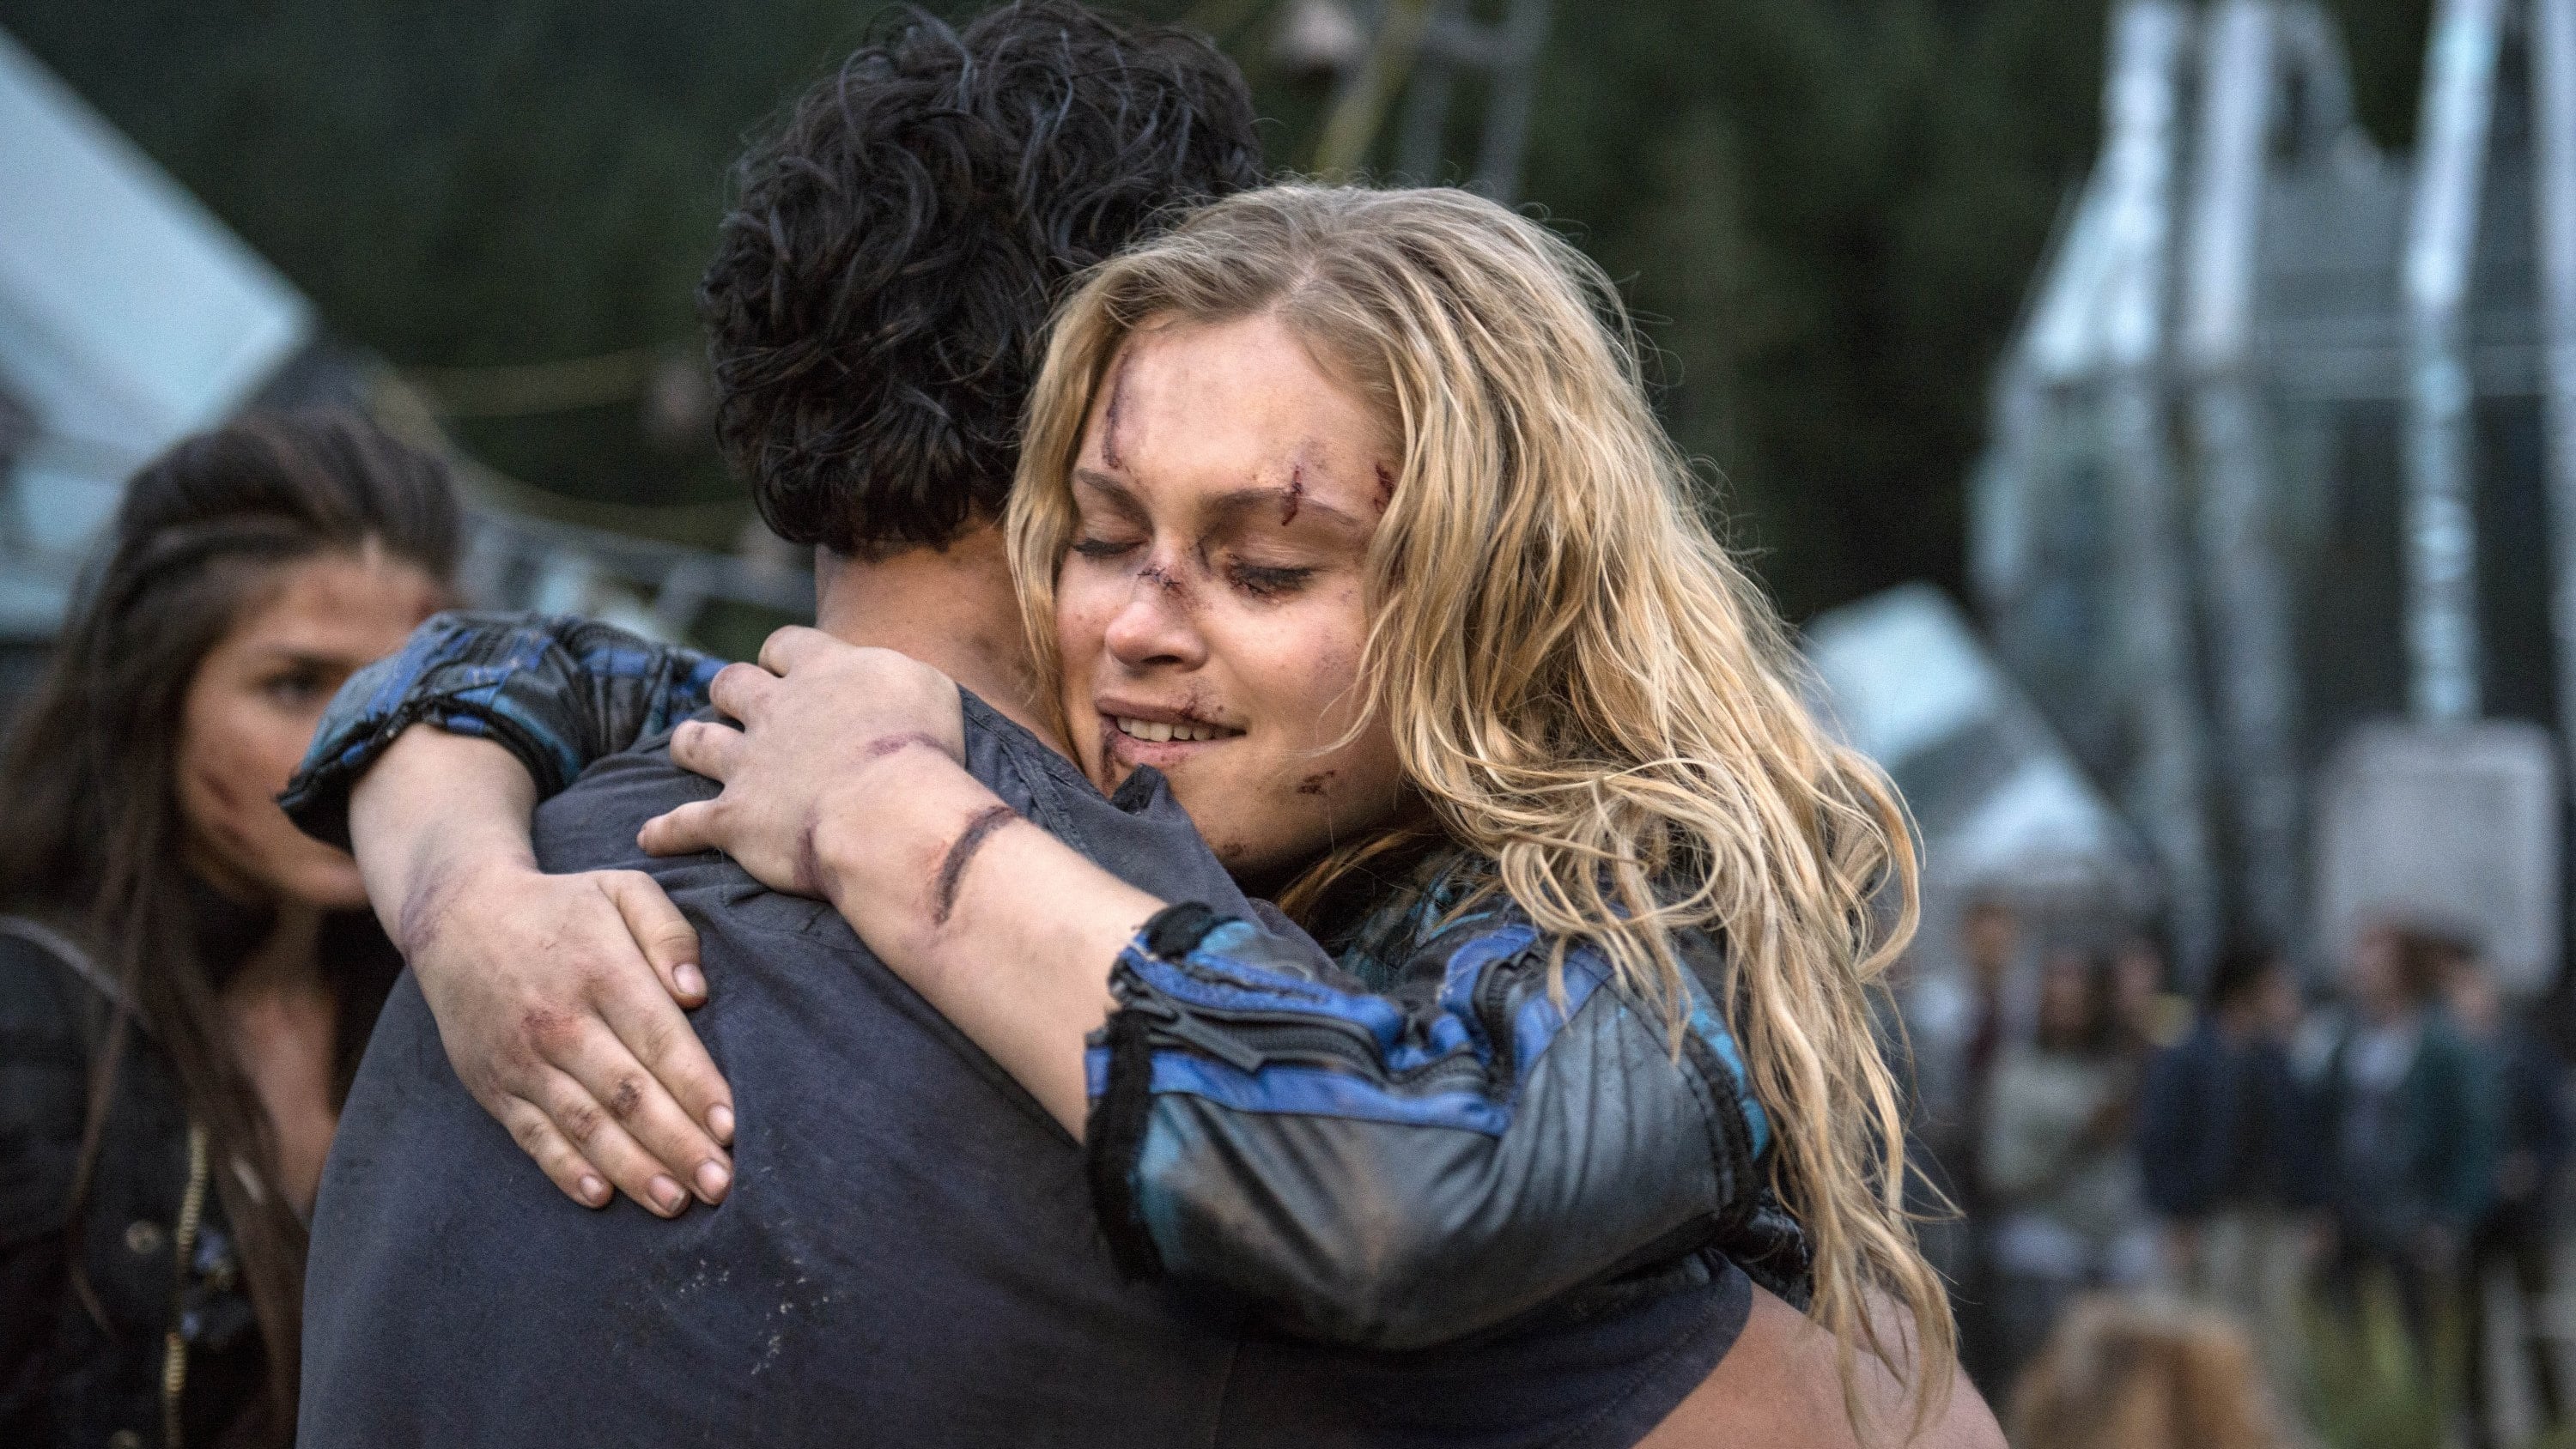 Image The 100 (2014) 1